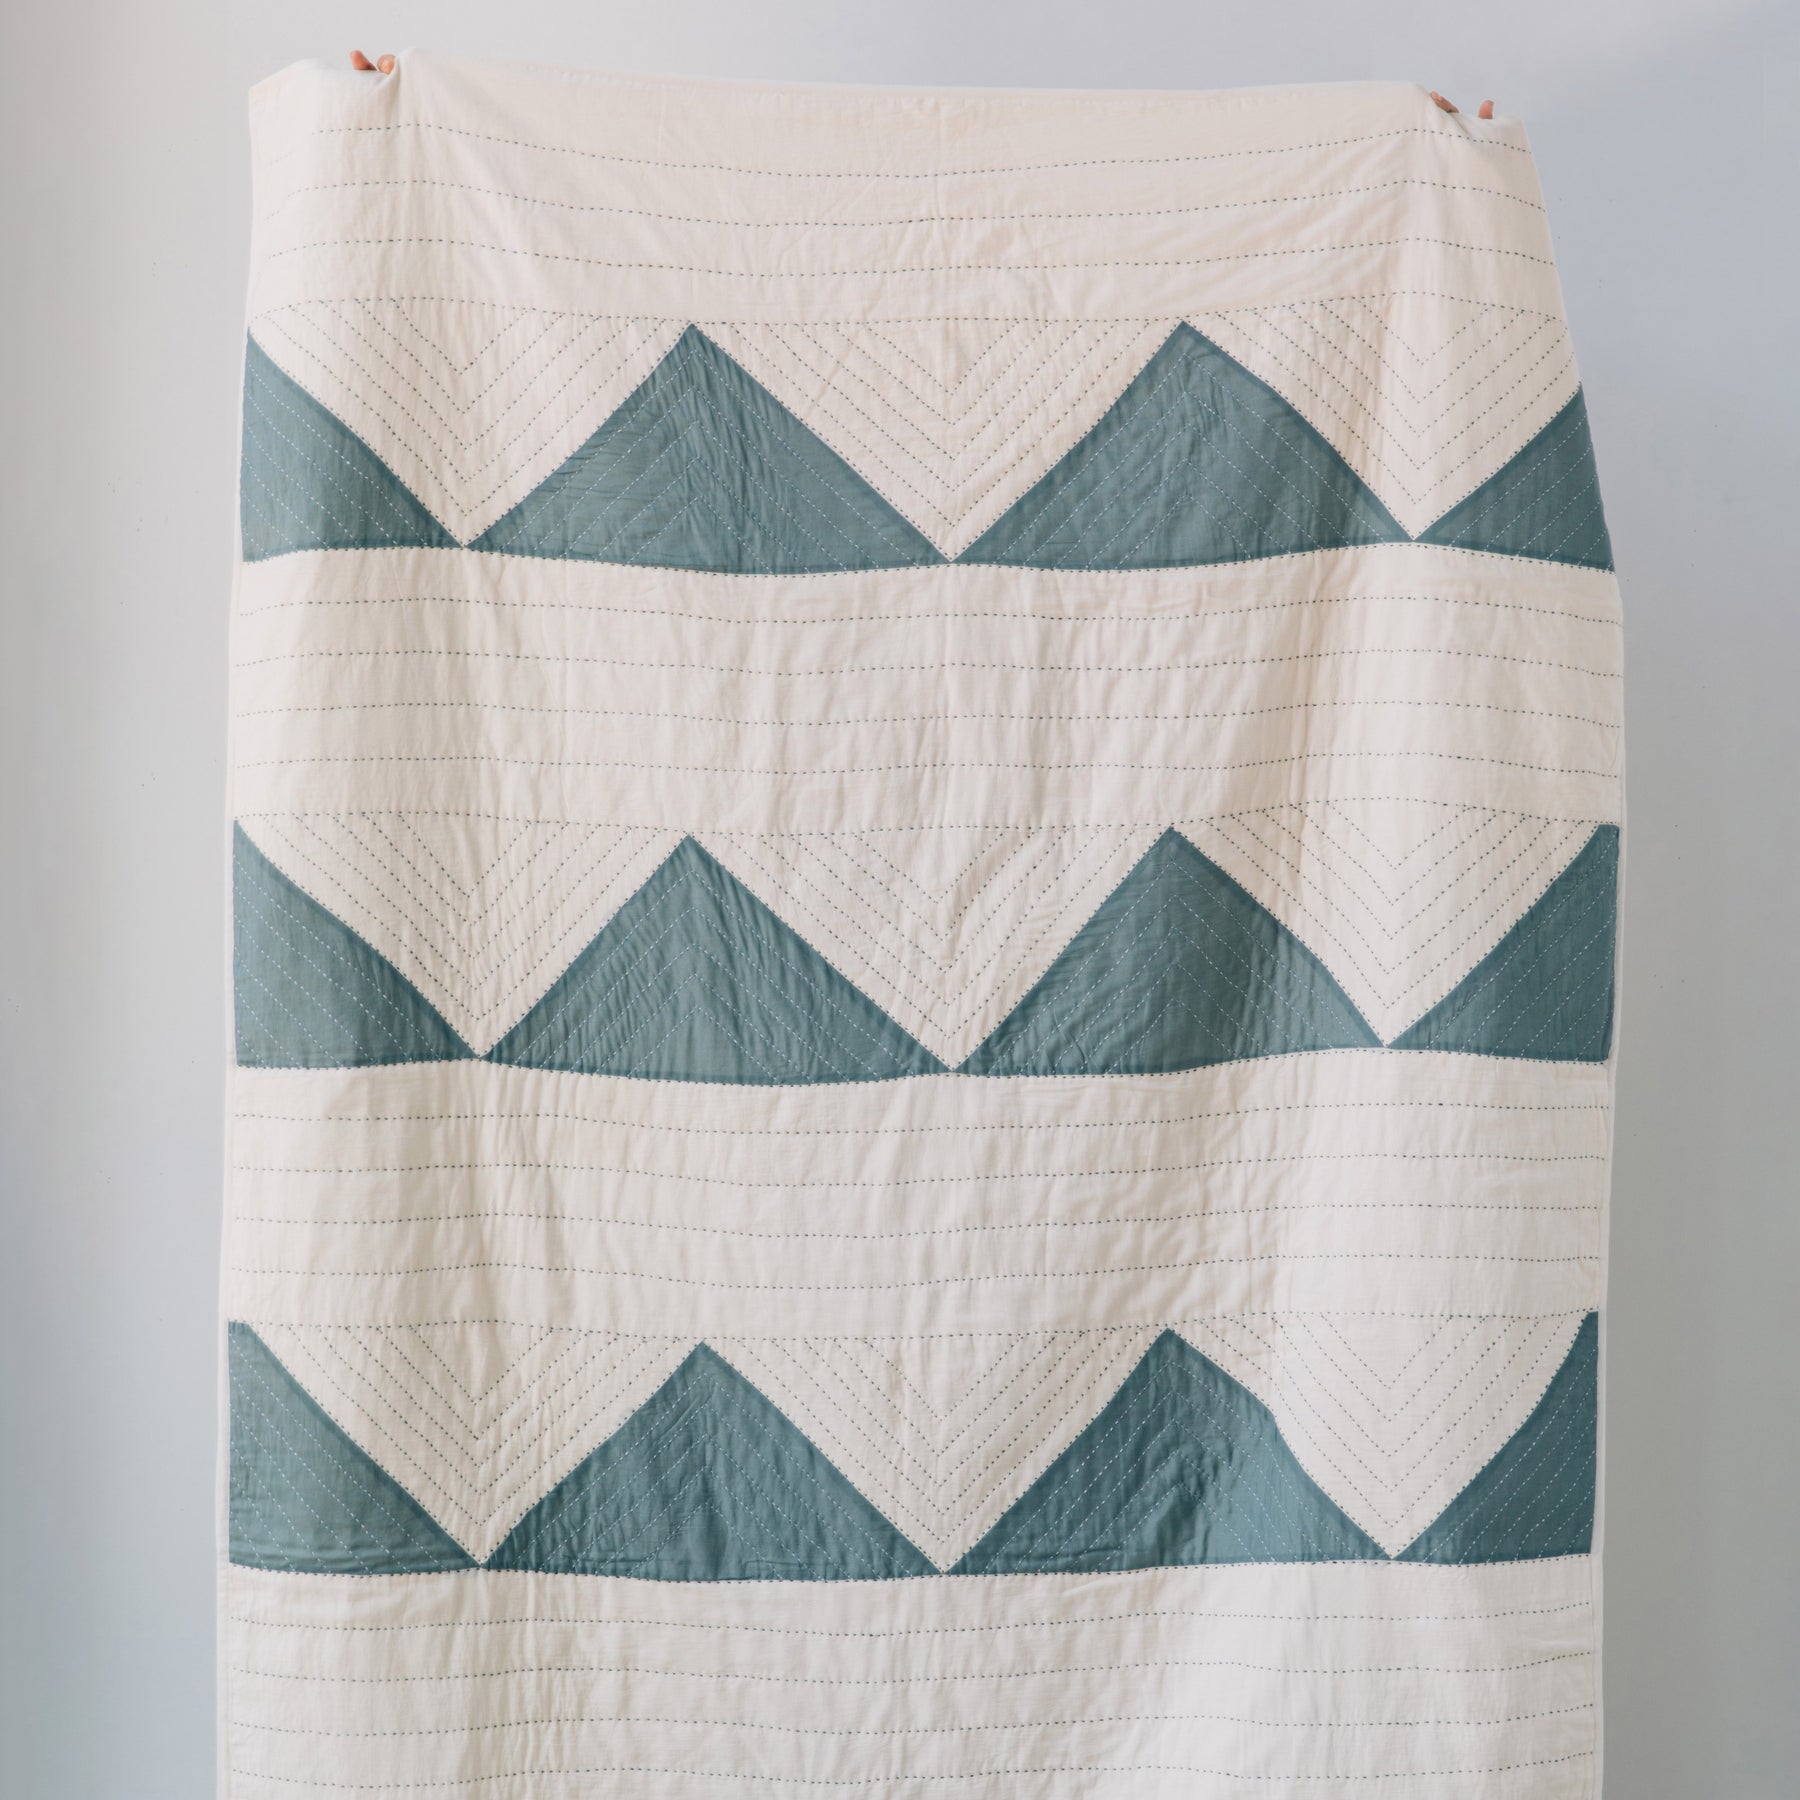 Triangle Quilt